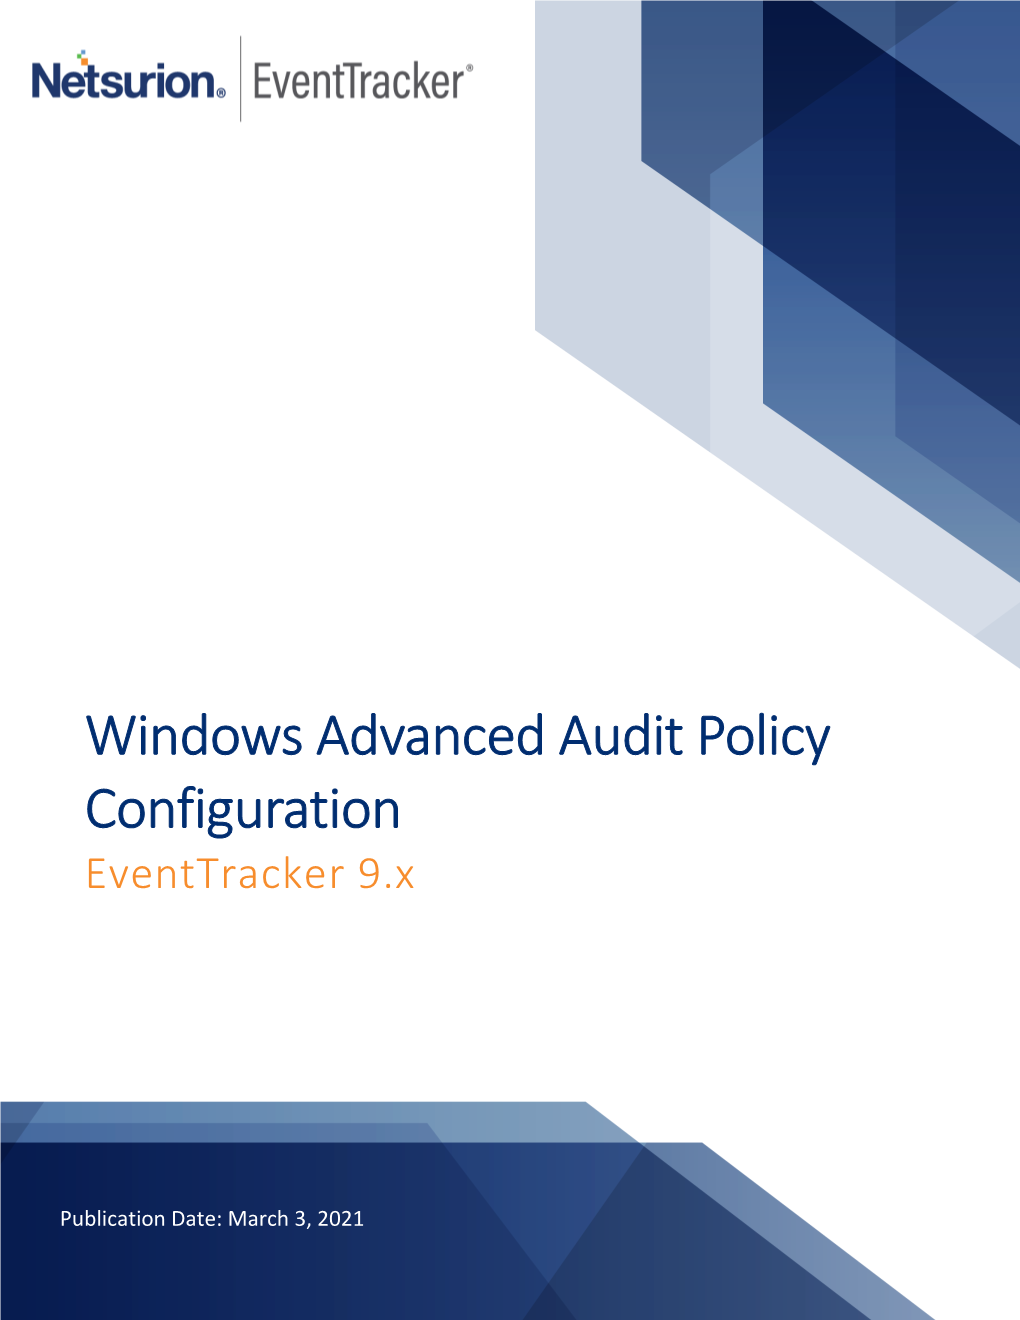 Windows Advanced Audit Policy Configuration Complete